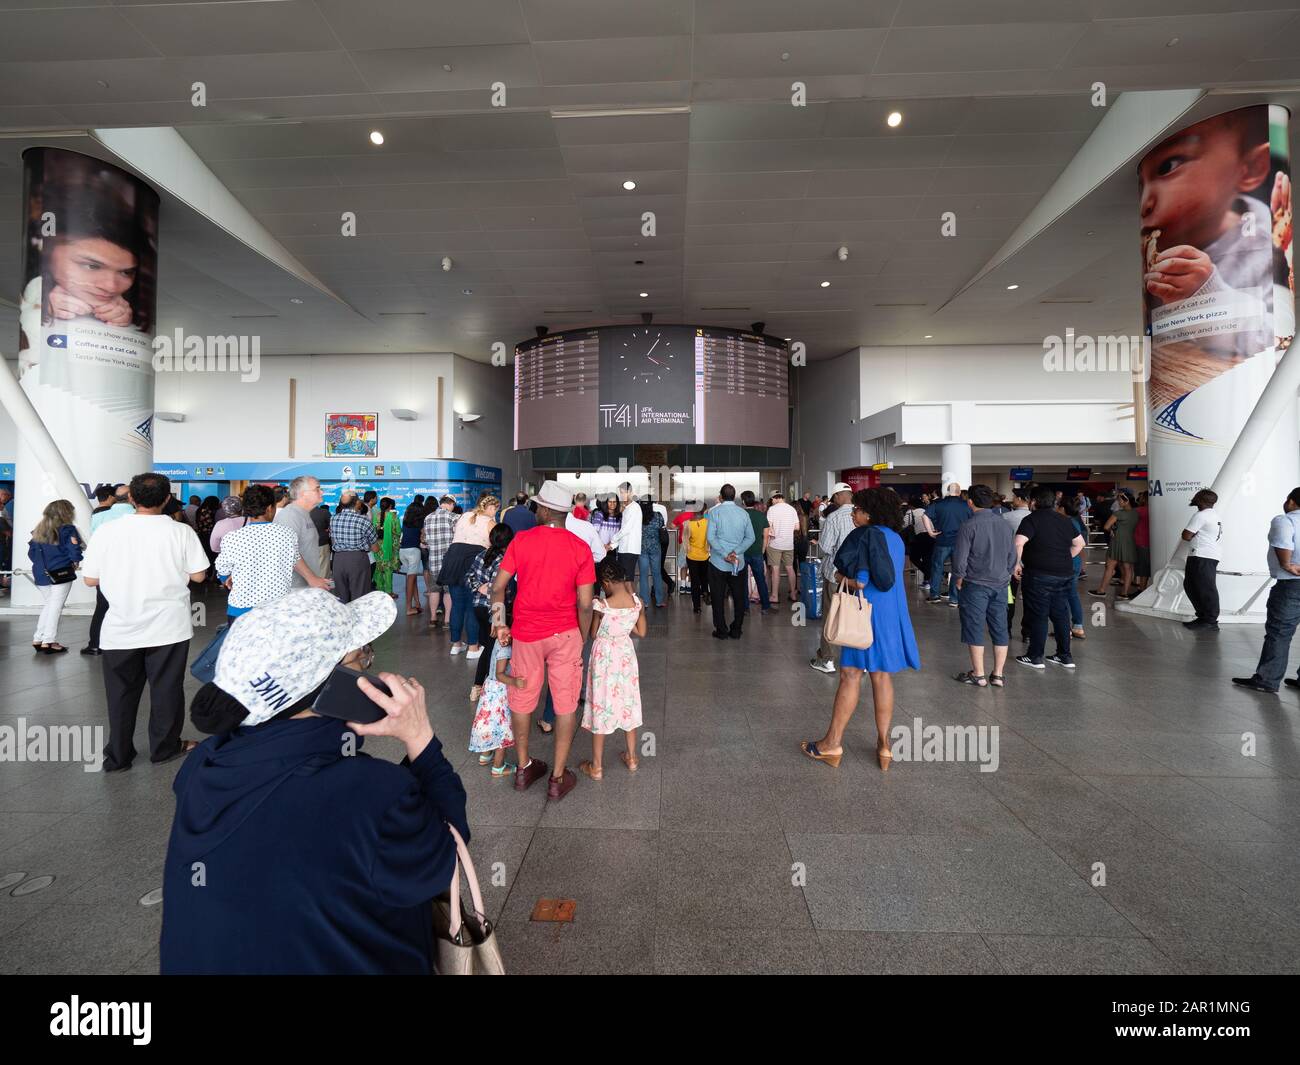 New York, USA - June 2, 2019: Passengers look at the information panel of arrivals and departures from JFK gate 4. Stock Photo